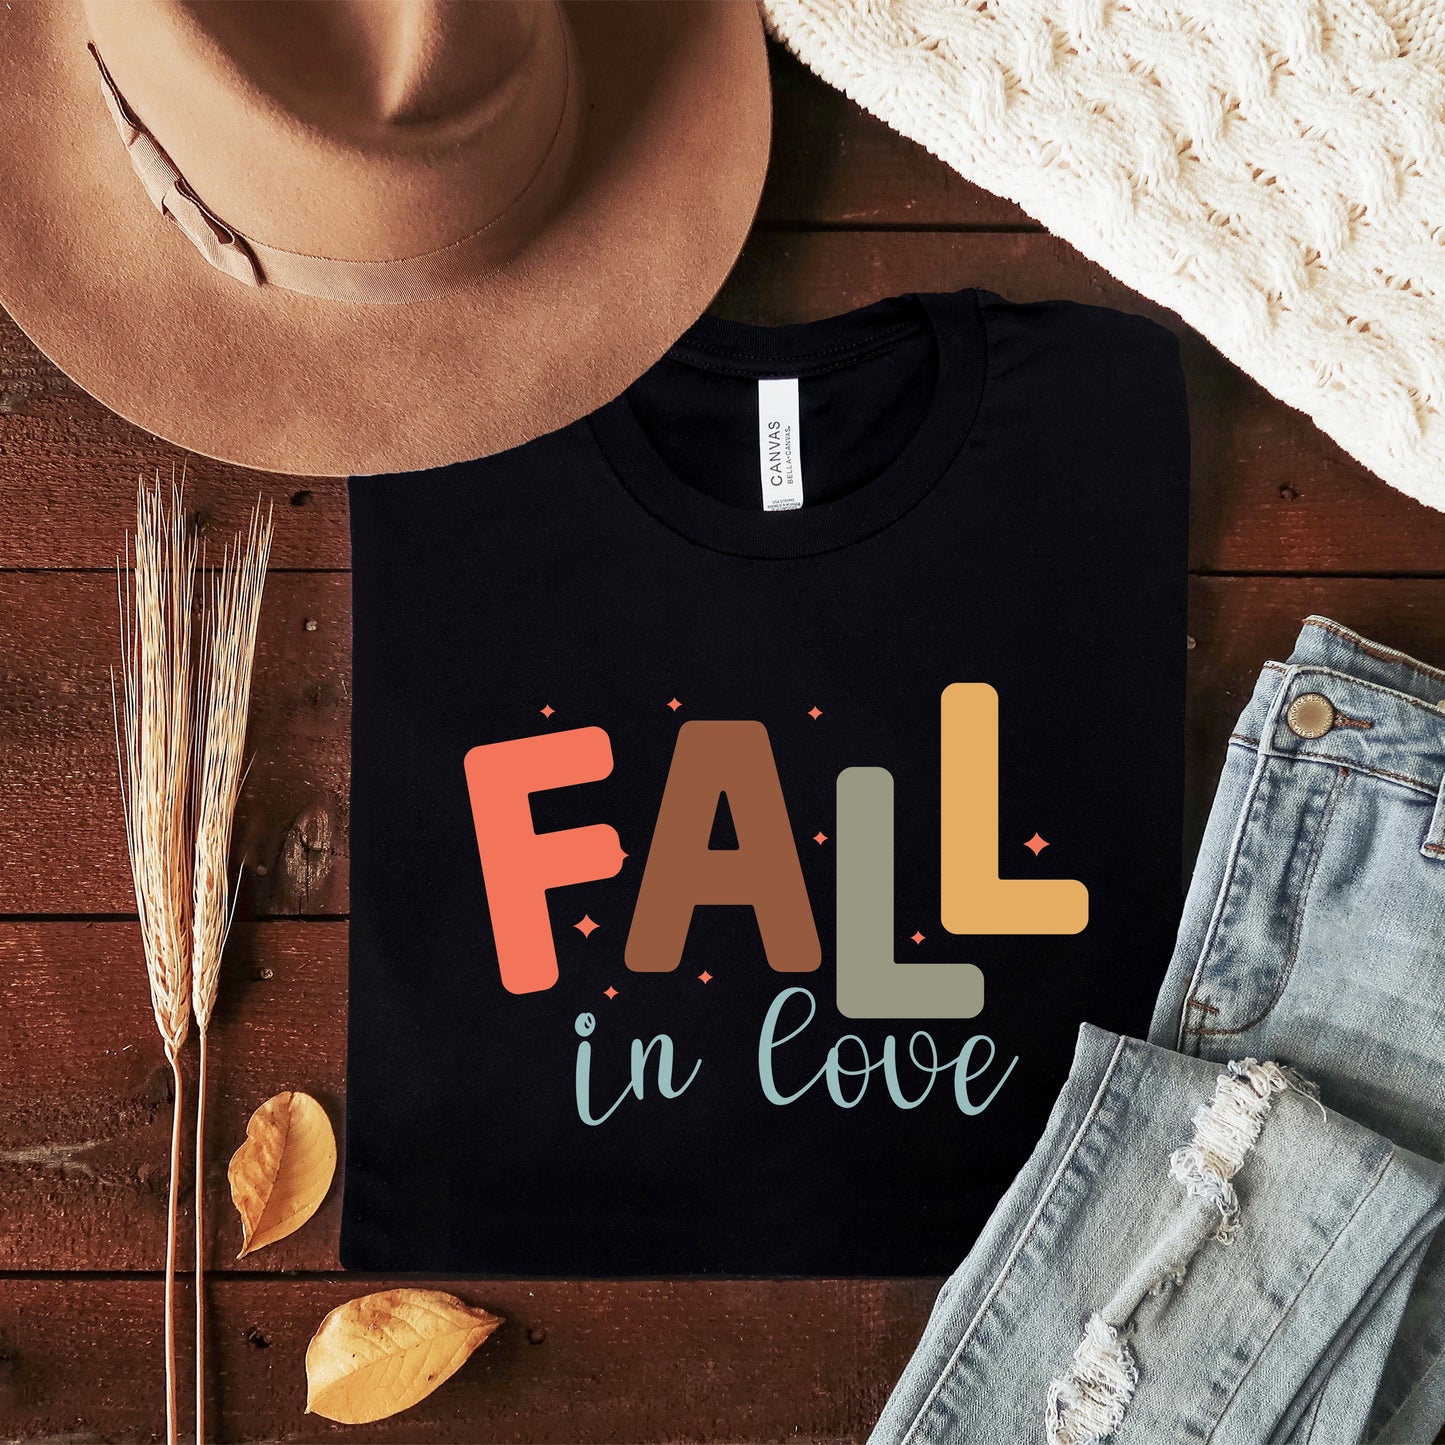 Fall Is Love | Short Sleeve Crew Neck